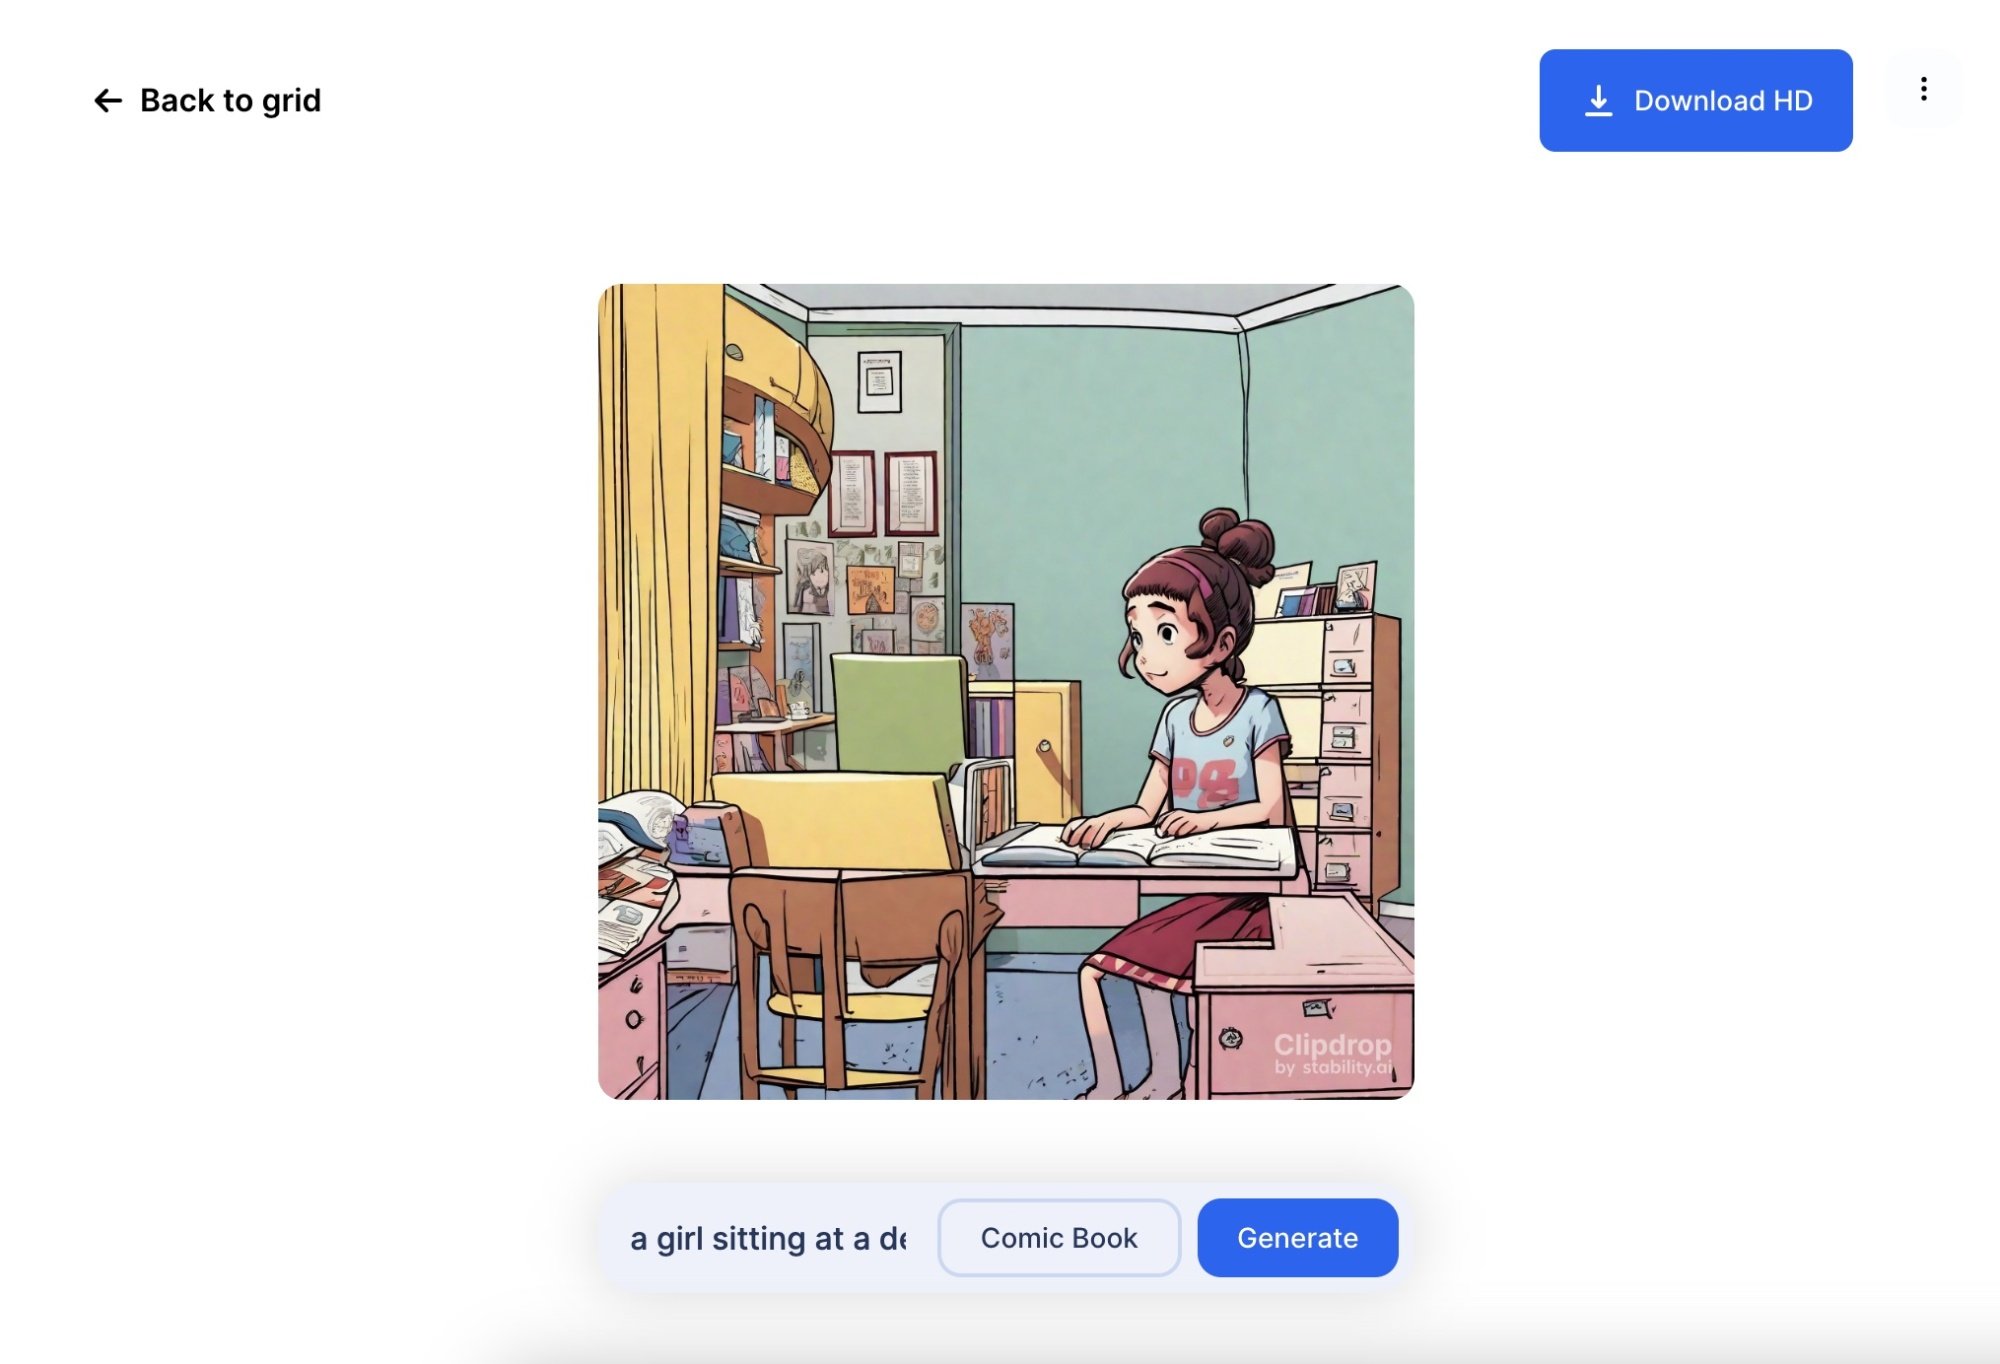 An example of using Stable AI, with an image of a girl sitting at a desk in the middle.